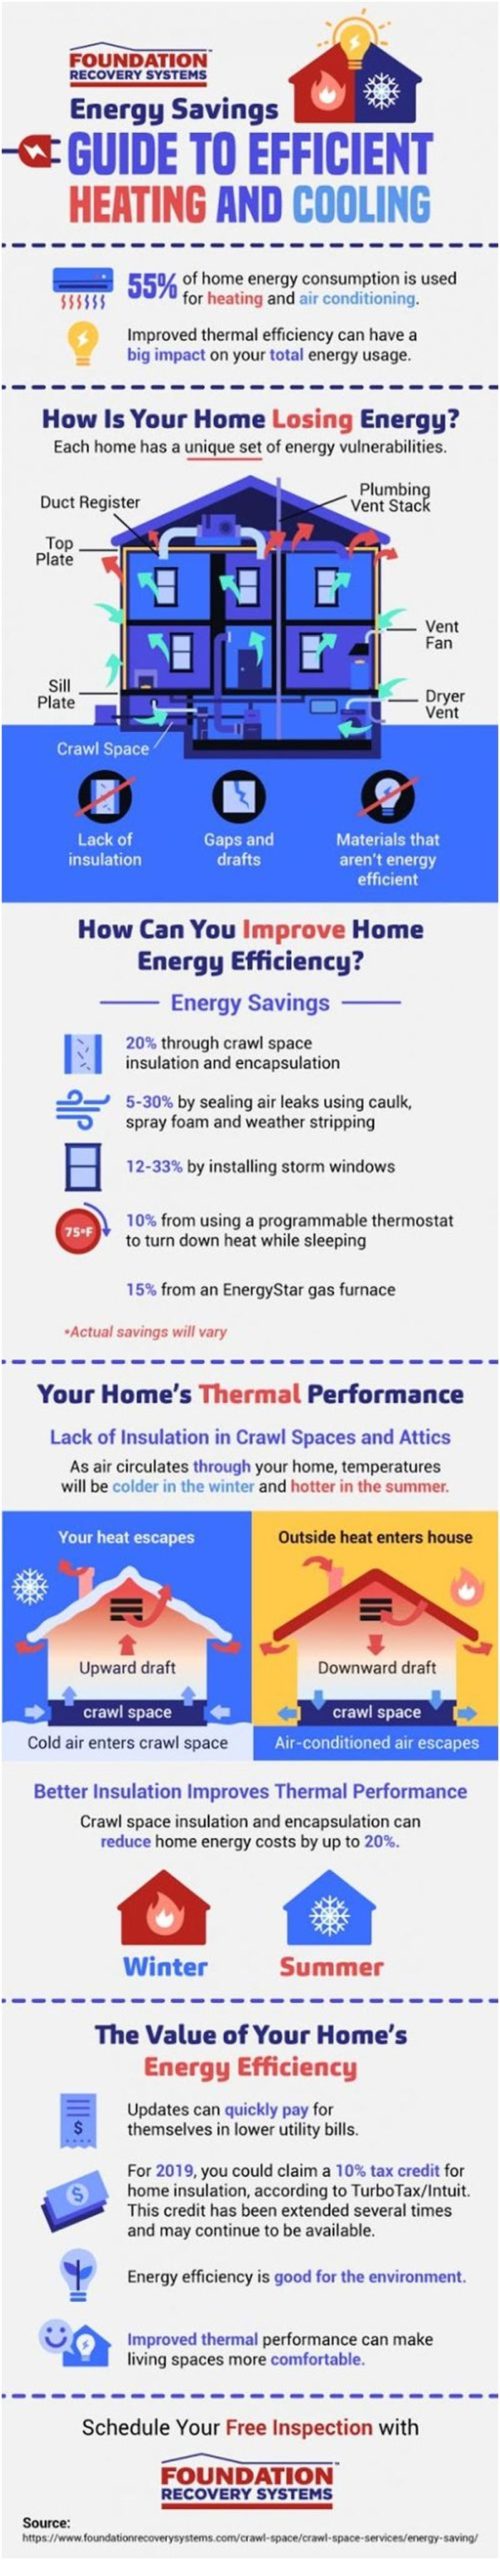 Ways to Reduce Wasted Energy in Your Home